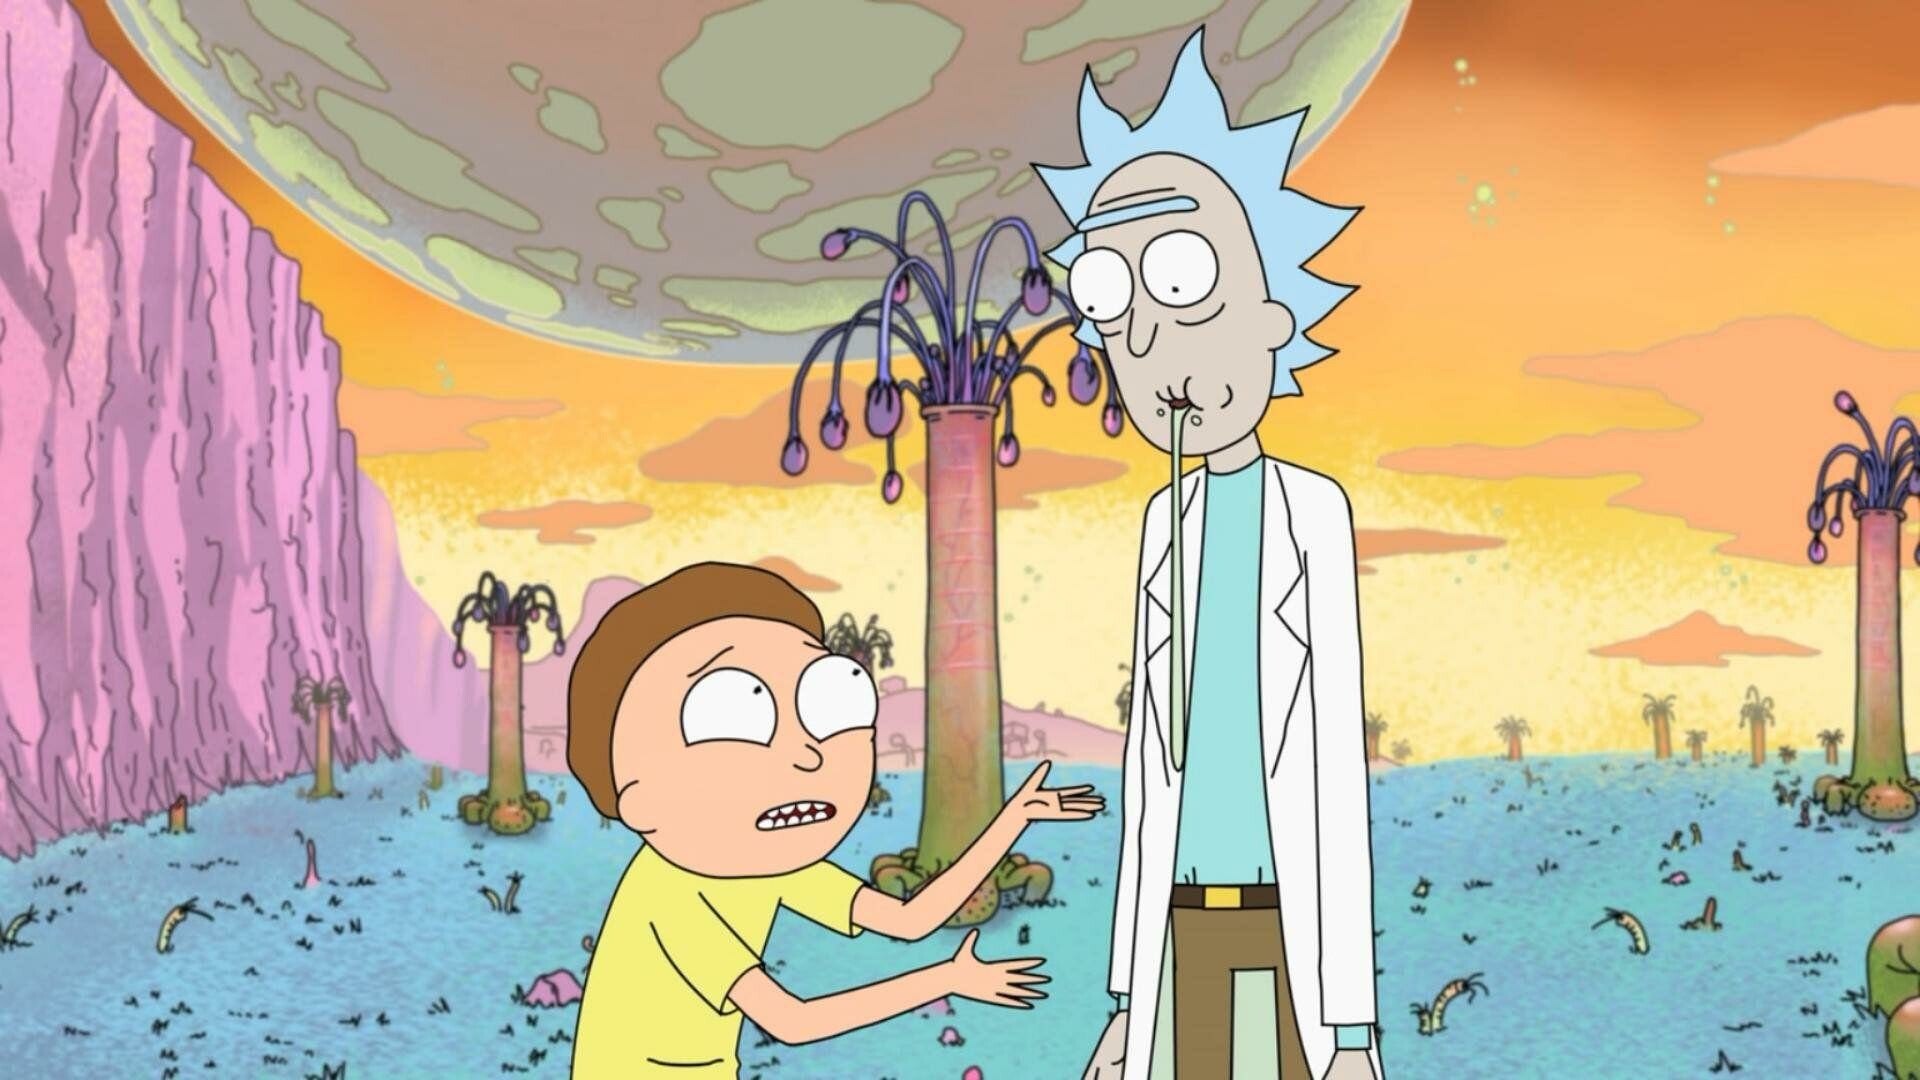 Rick and Morty: An eccentric, alcoholic scientist who takes his grandson on dangerous, outlandish adventures. 1920x1080 Full HD Wallpaper.